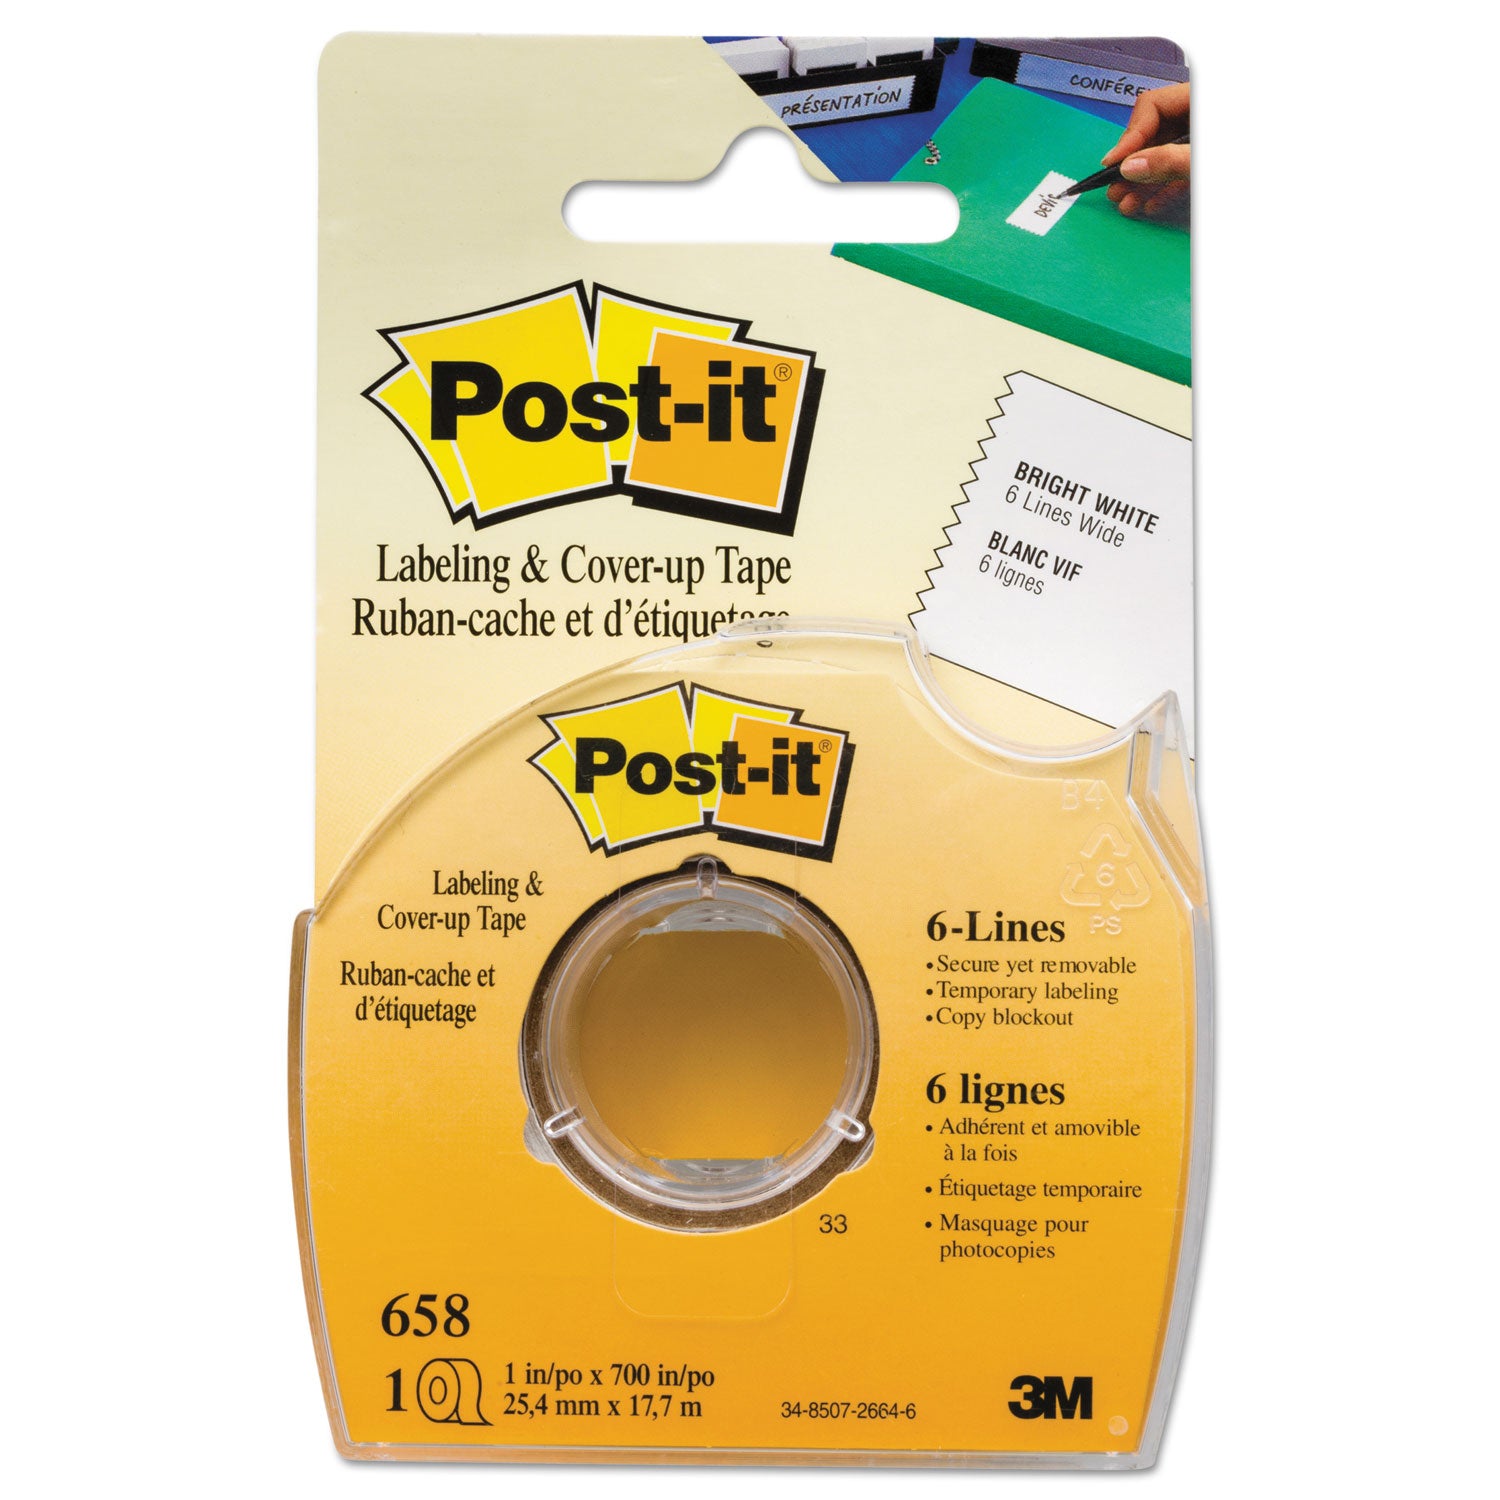 Labeling and Cover-Up Tape, Non-Refillable, Clear Applicator, 1" x 700 - 